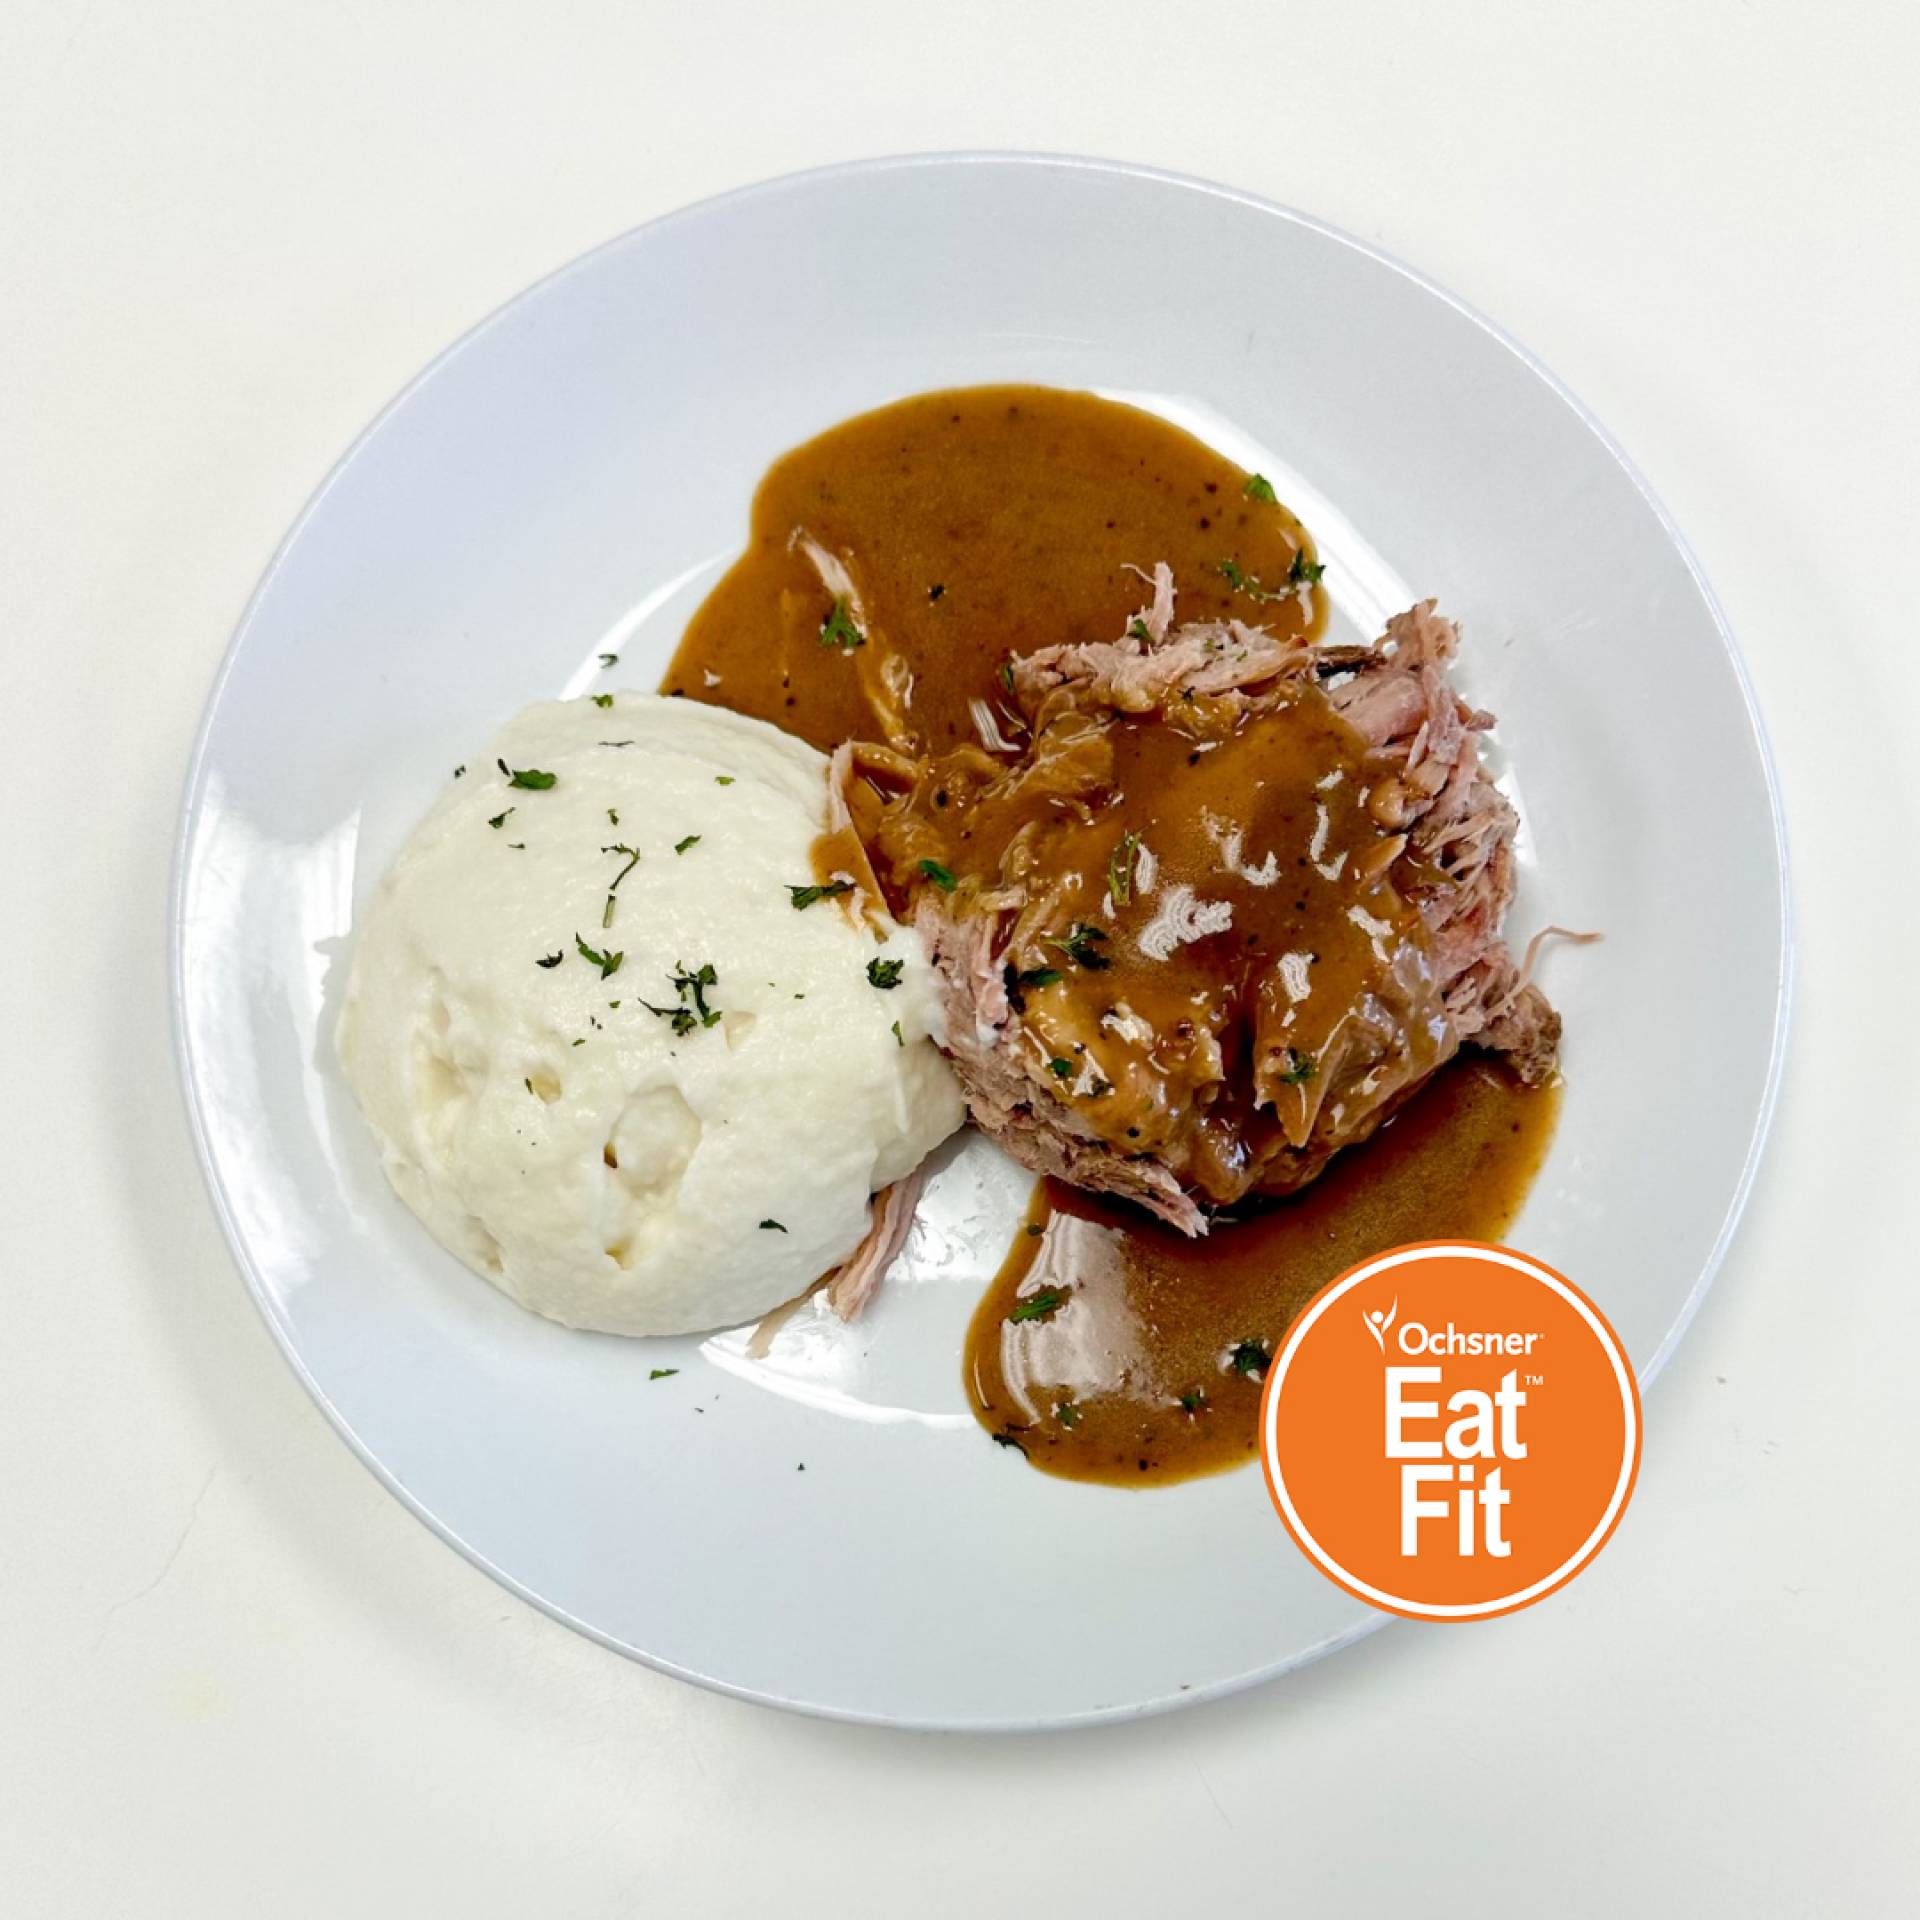 Smoked Pork Roast with Brown Gravy and Cauliflower Mashed Potatoes - Low Carb